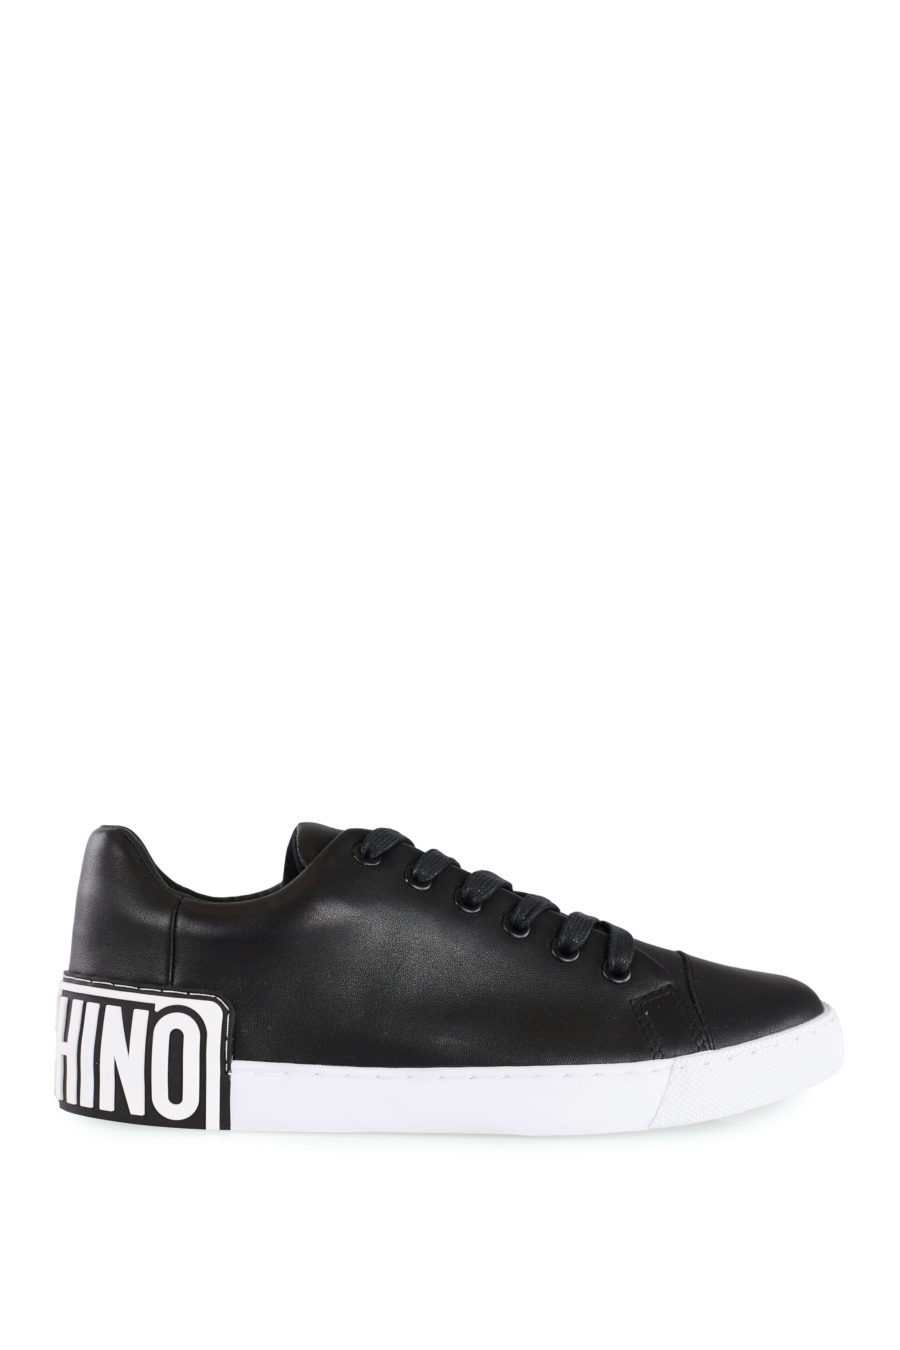 Black trainers with rubber logo - IMG 8263 copy